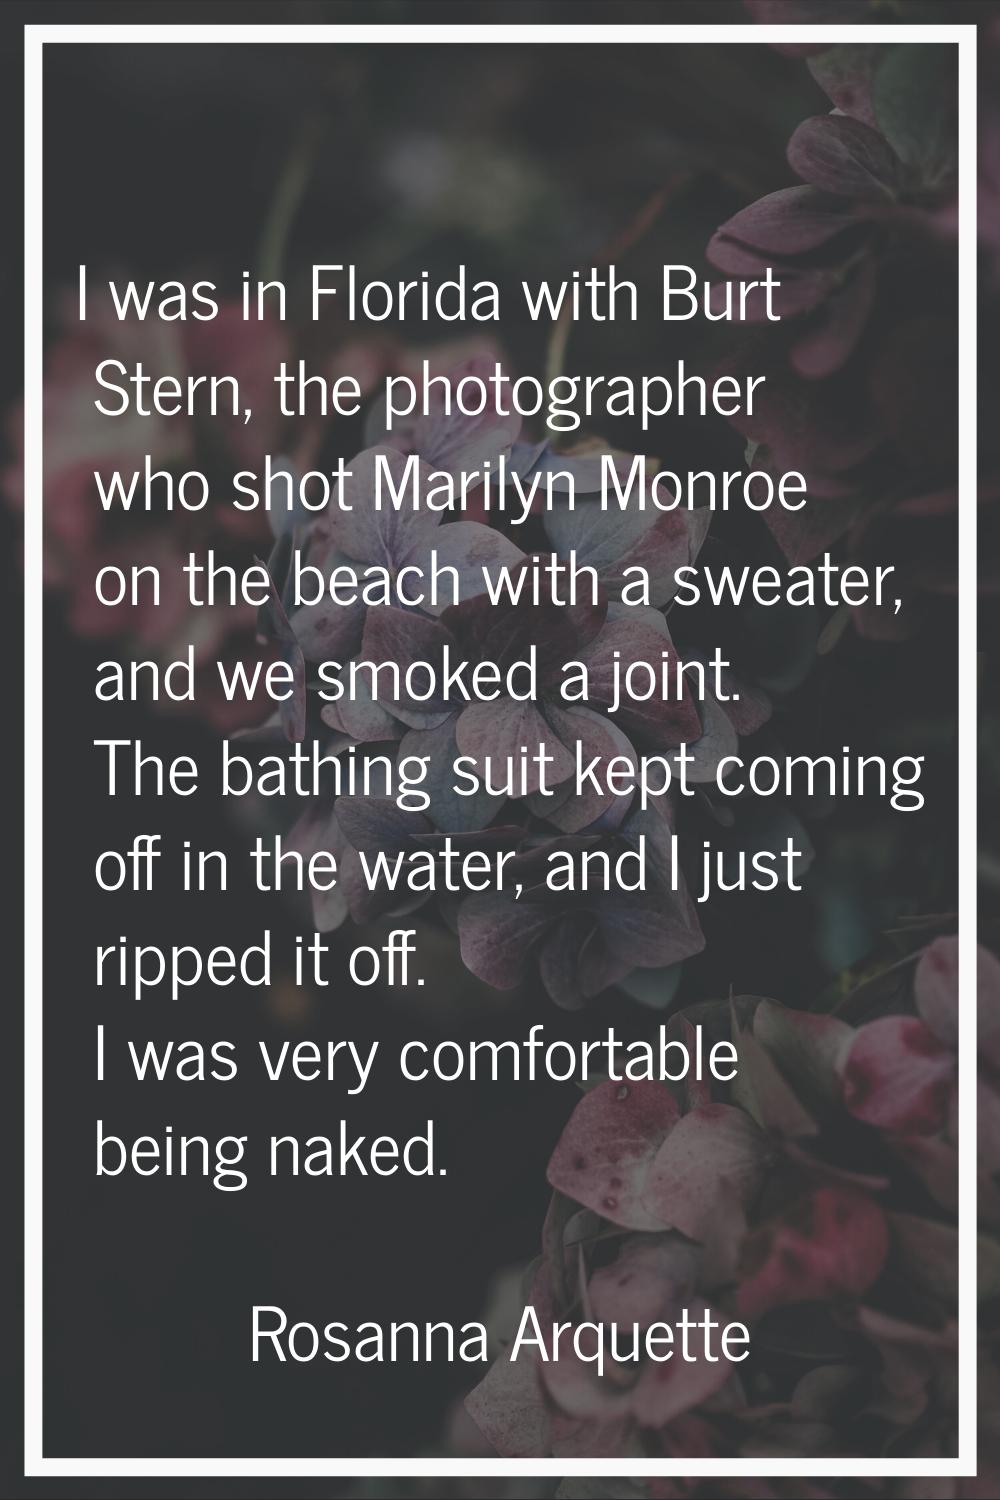 I was in Florida with Burt Stern, the photographer who shot Marilyn Monroe on the beach with a swea